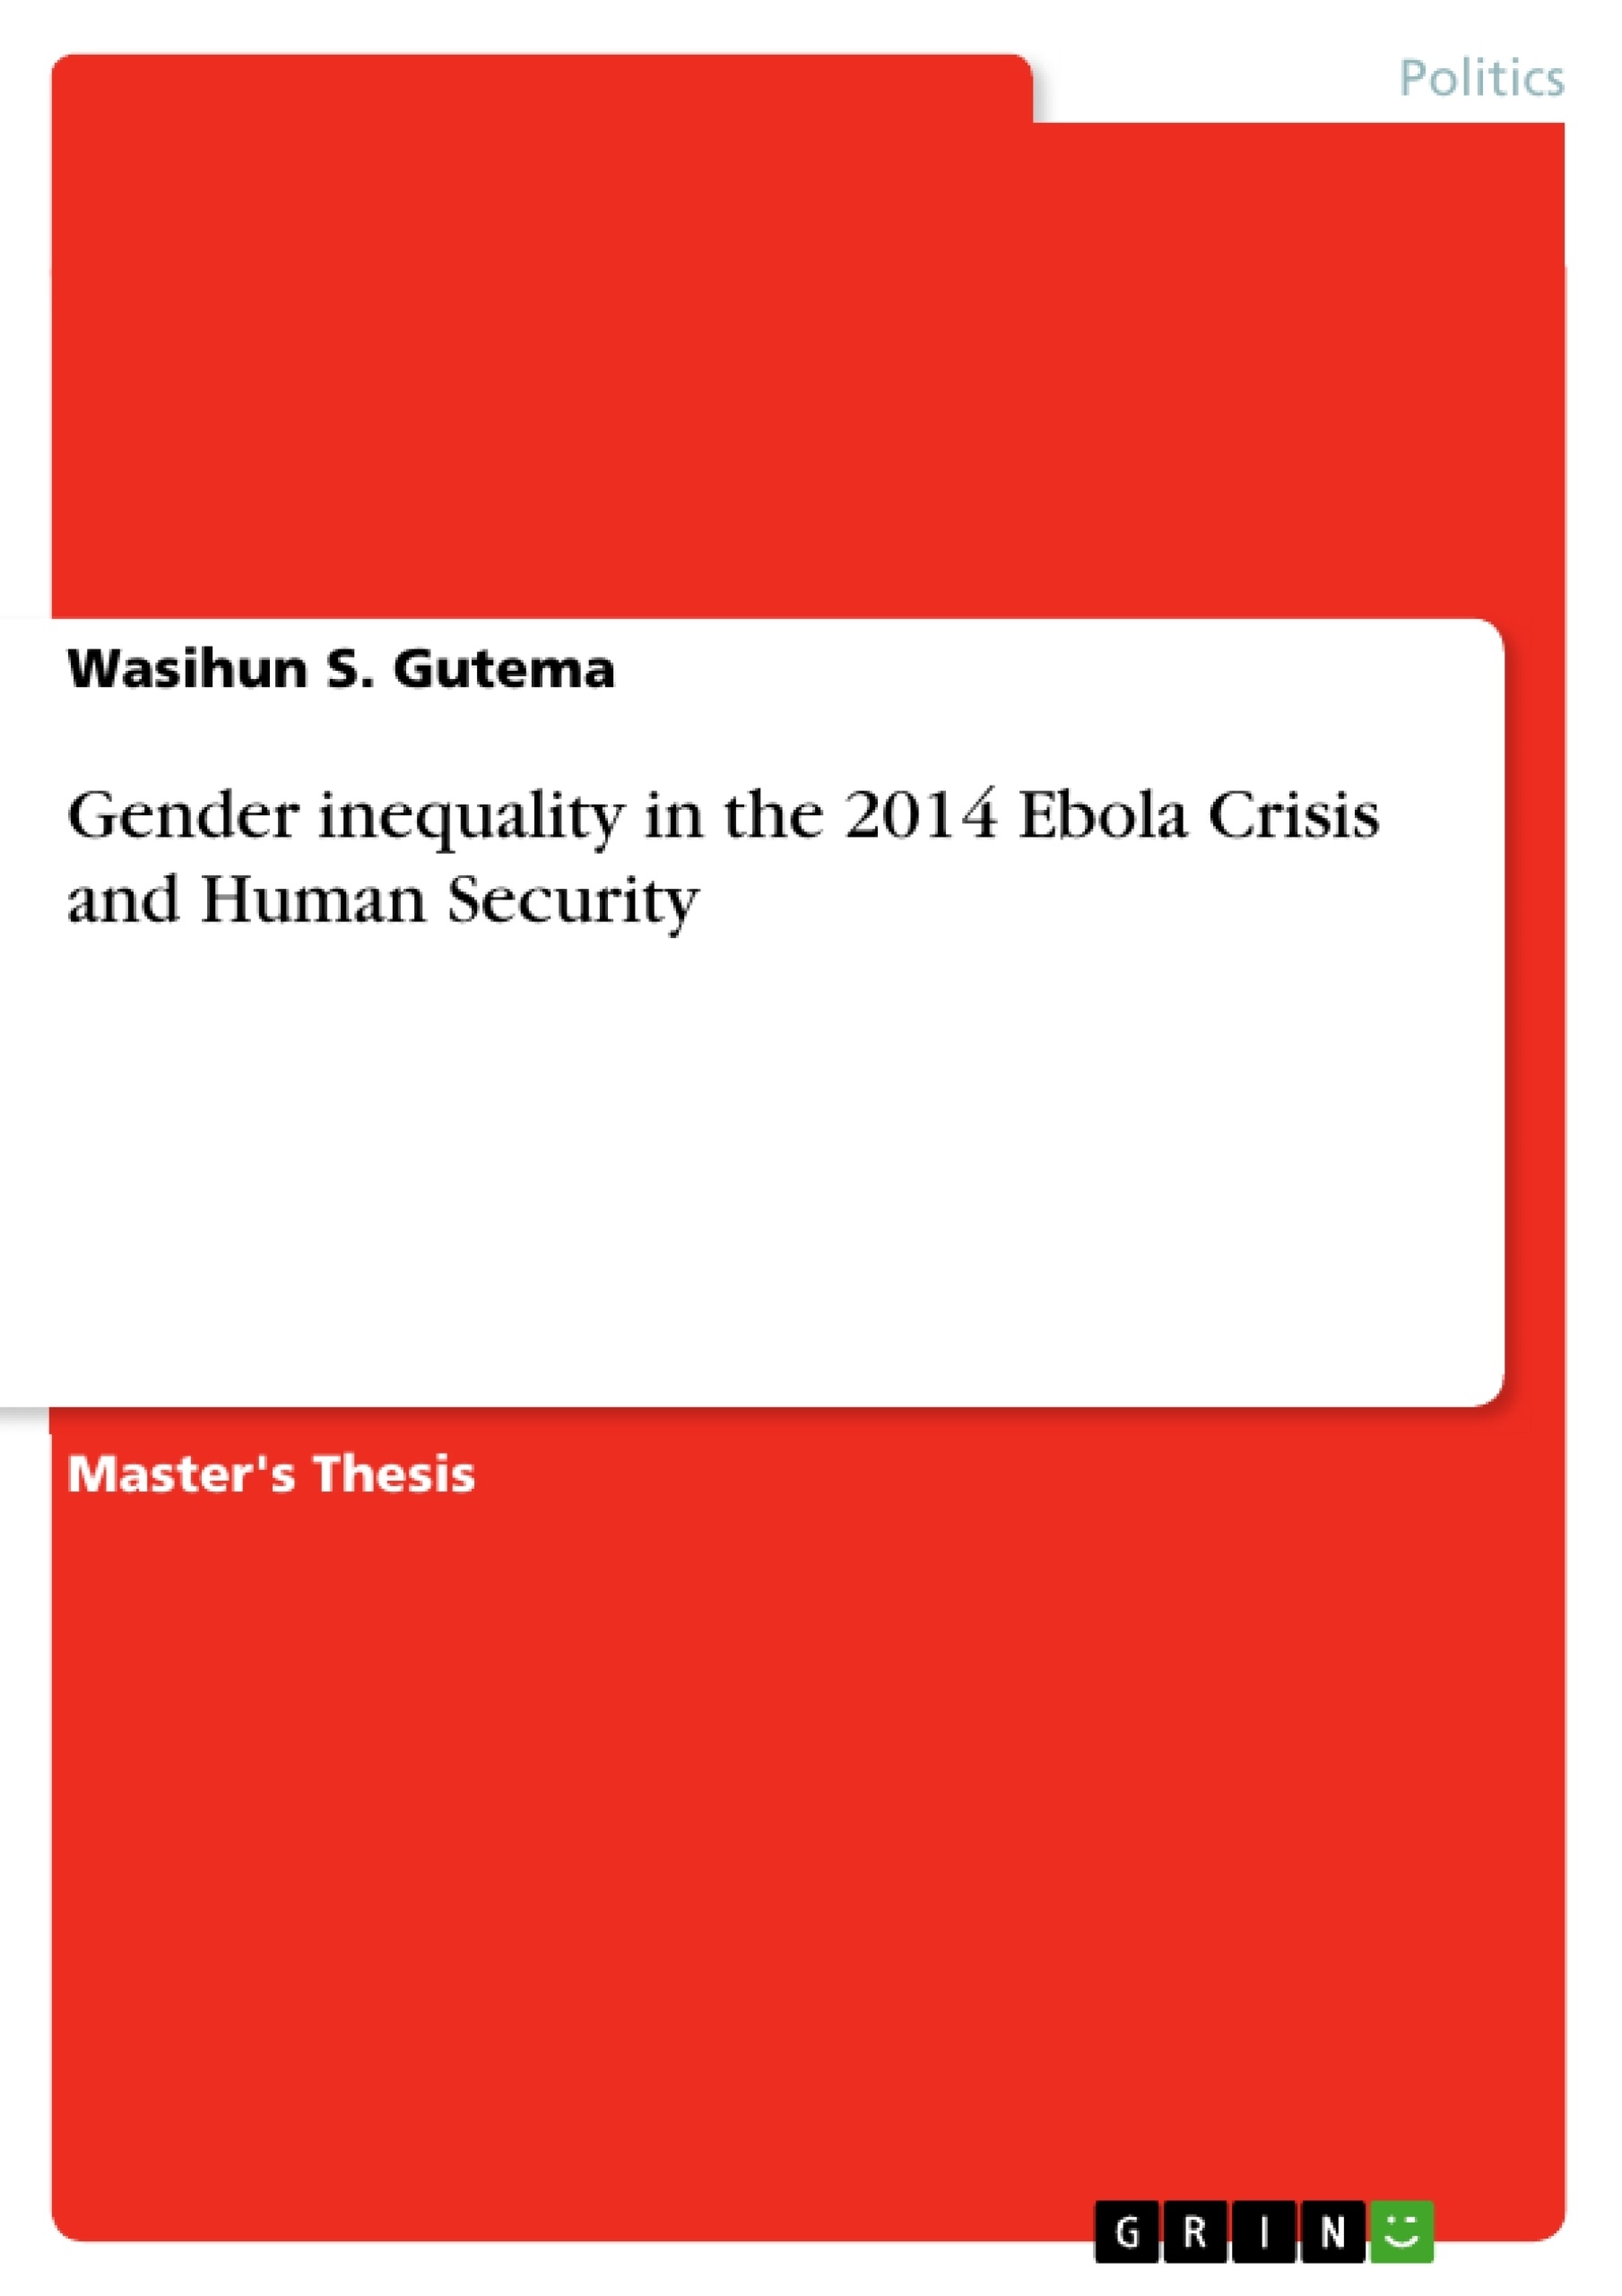 Title: Gender inequality in the 2014 Ebola Crisis and Human Security